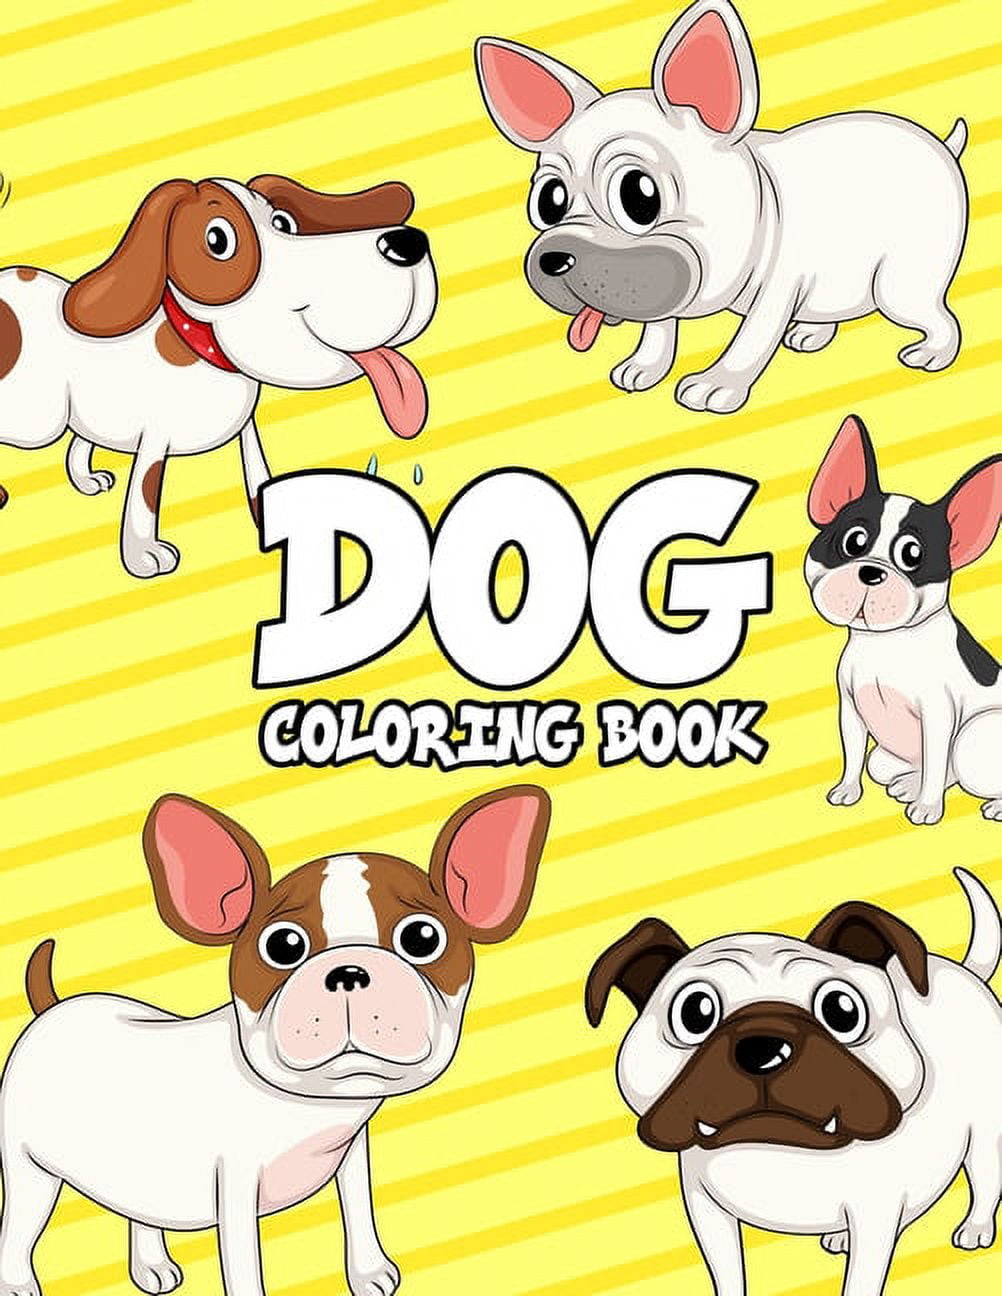 Kids Coloring Book Pets Dogs: Girls Ages 8-12 or Adult Relaxation, Kids Ages  4-8, Dog Coloring Books for Kids Ages 8-12, Really Relaxing Animal Colo  (Paperback)